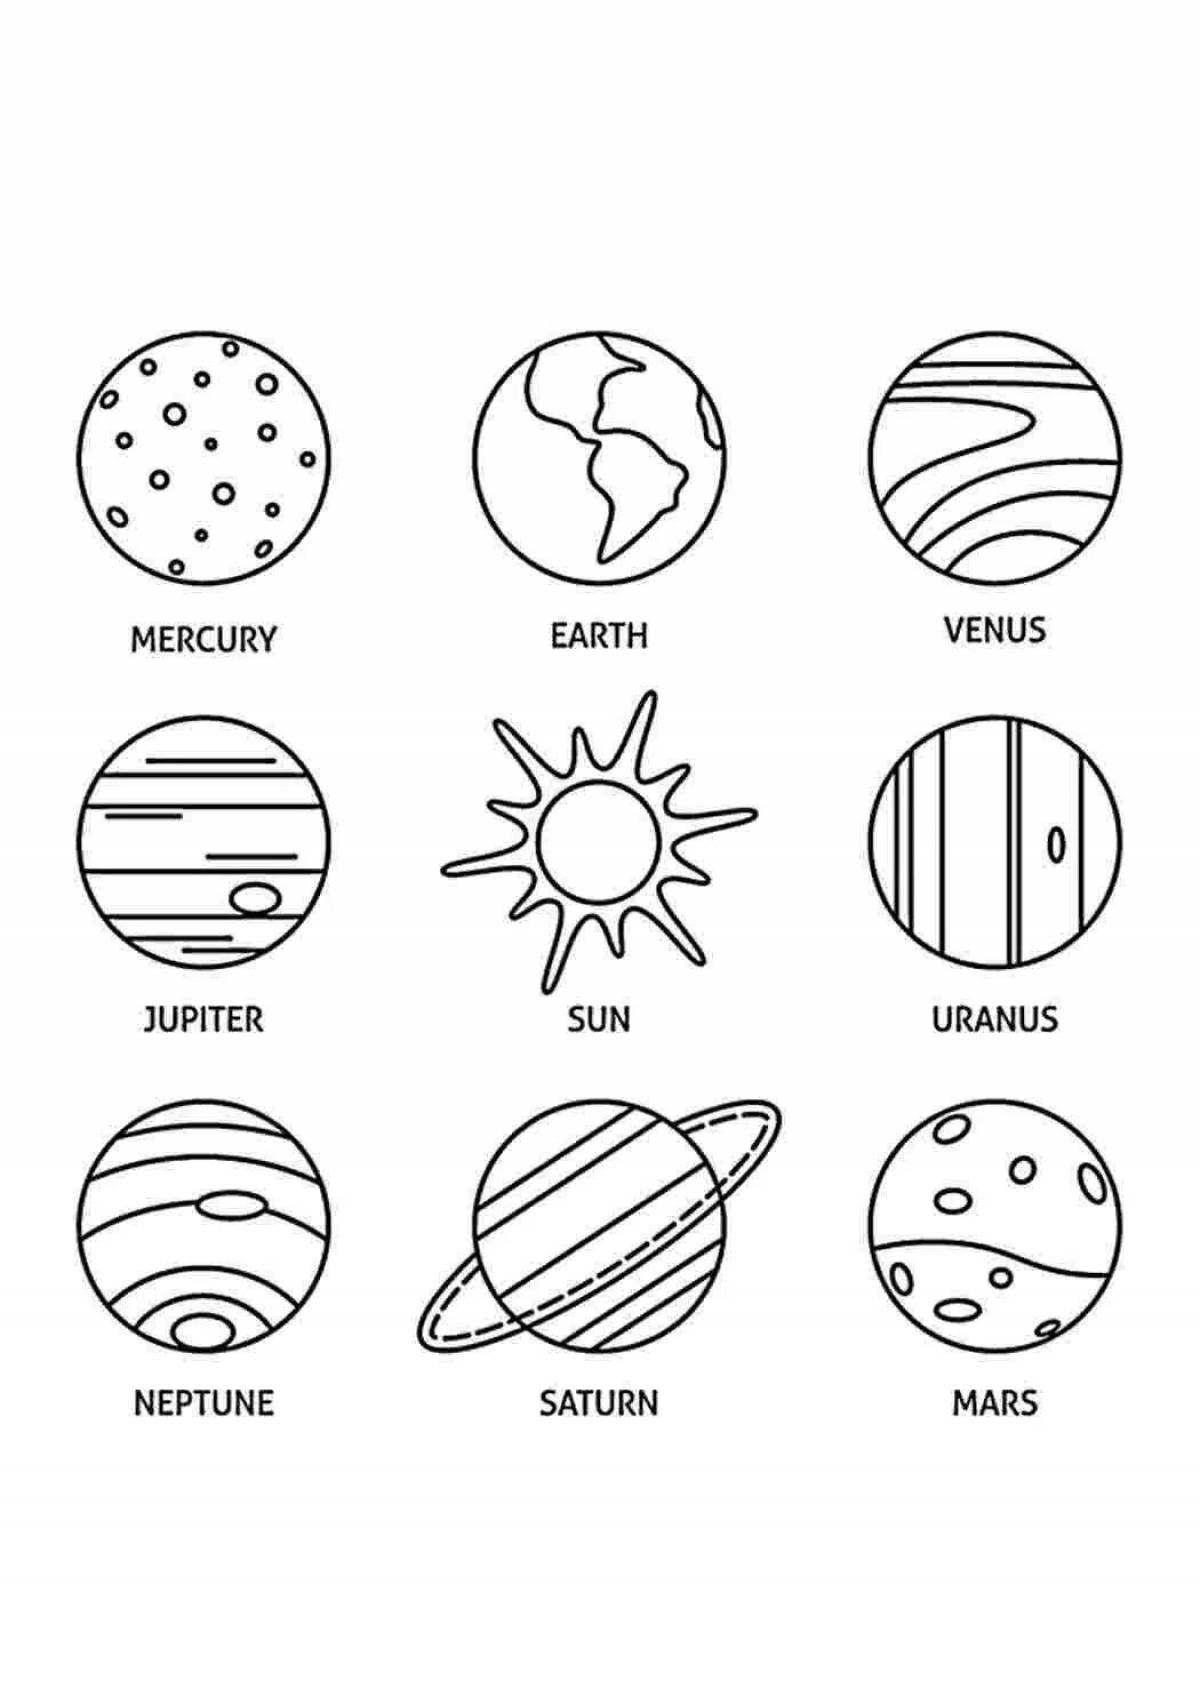 Coloring book of solar system planets with names